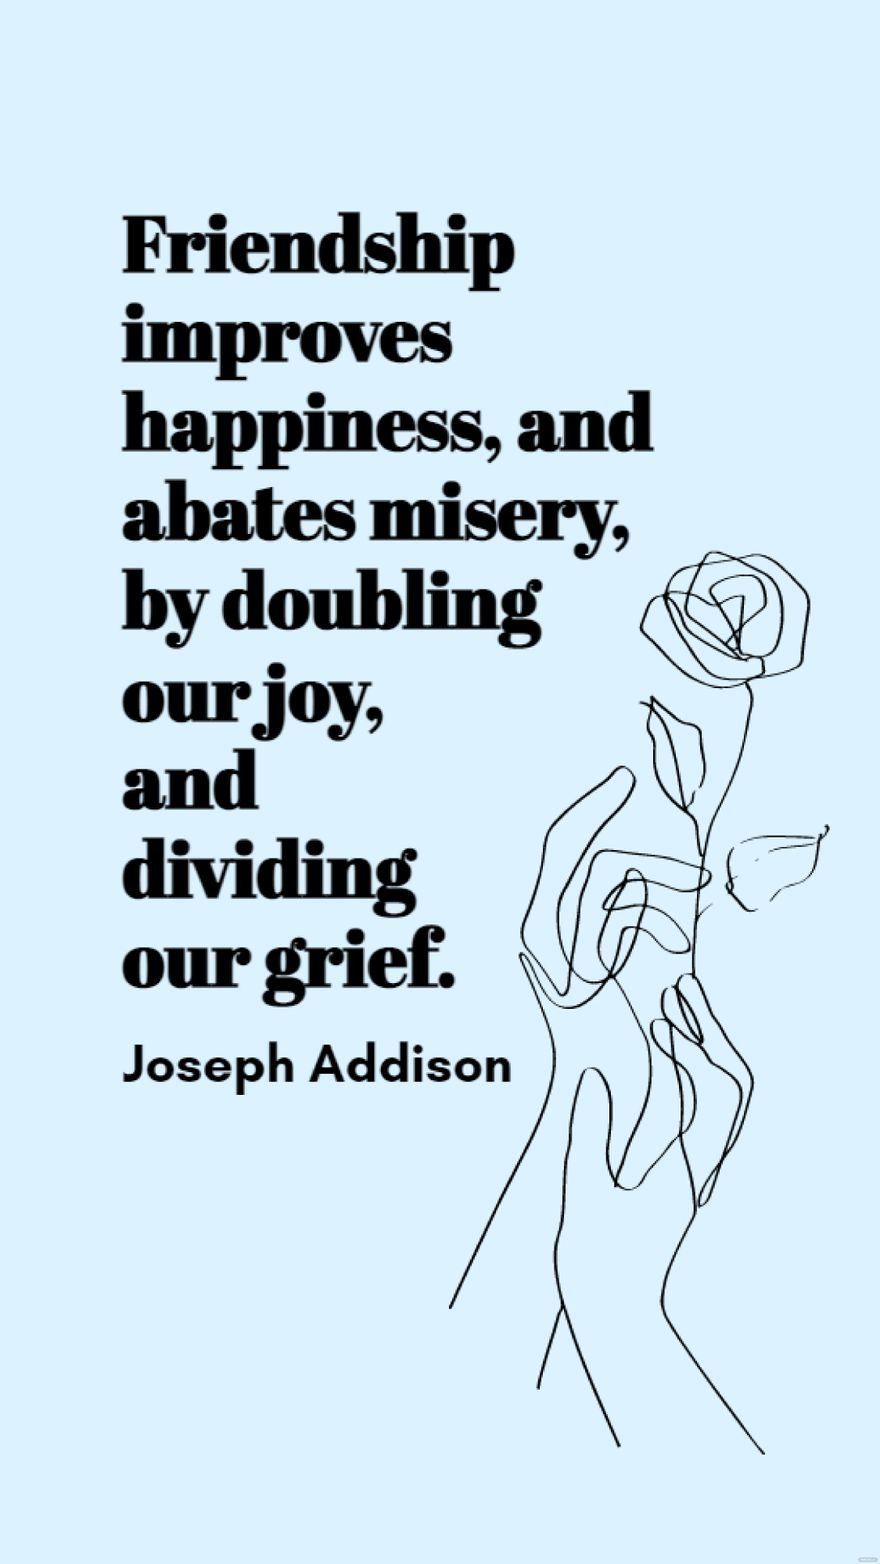 Joseph Addison - Friendship improves happiness, and abates misery, by doubling our joy, and dividing our grief. in JPG